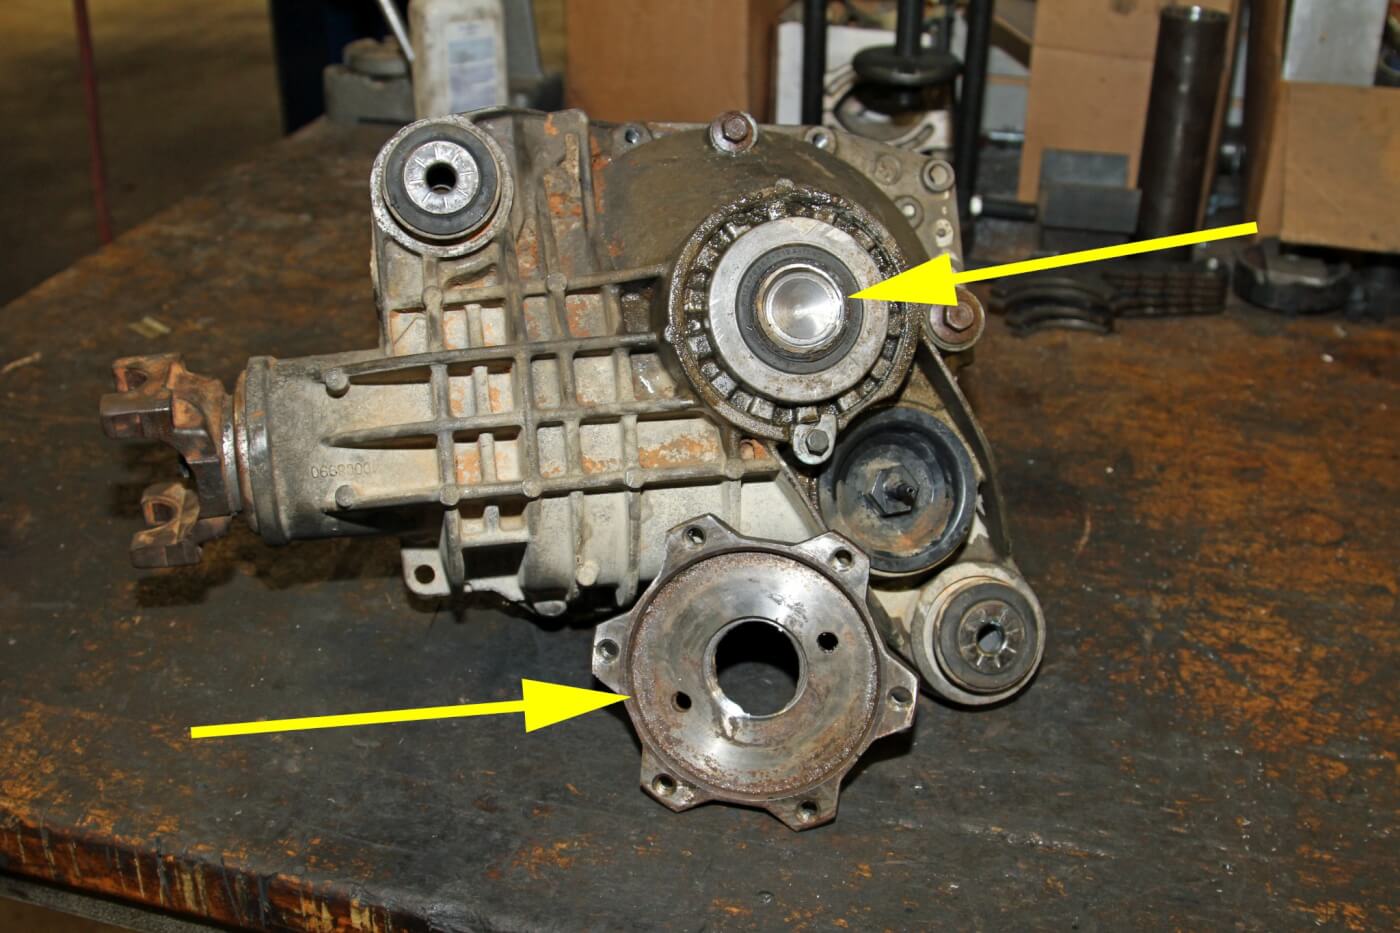 9. We had to have the crew at Twin City Auto Machine mill the flange off the axle shaft (see arrows) so that the case could be split with the axle shaft stuck in the differential.